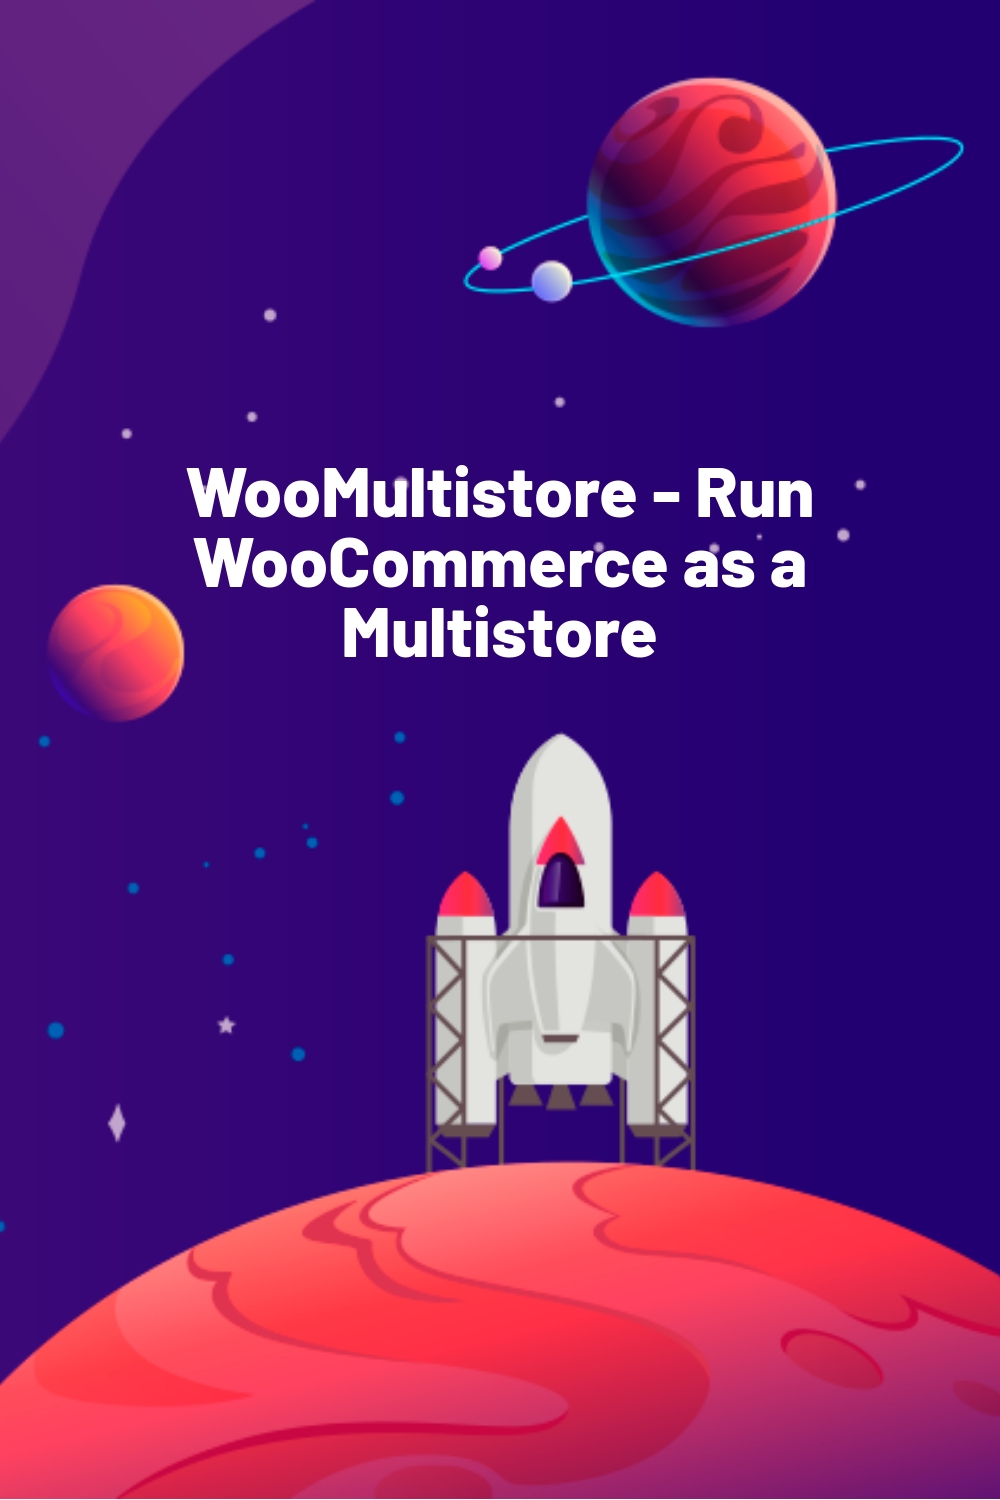 WooMultistore – Run WooCommerce as a Multistore